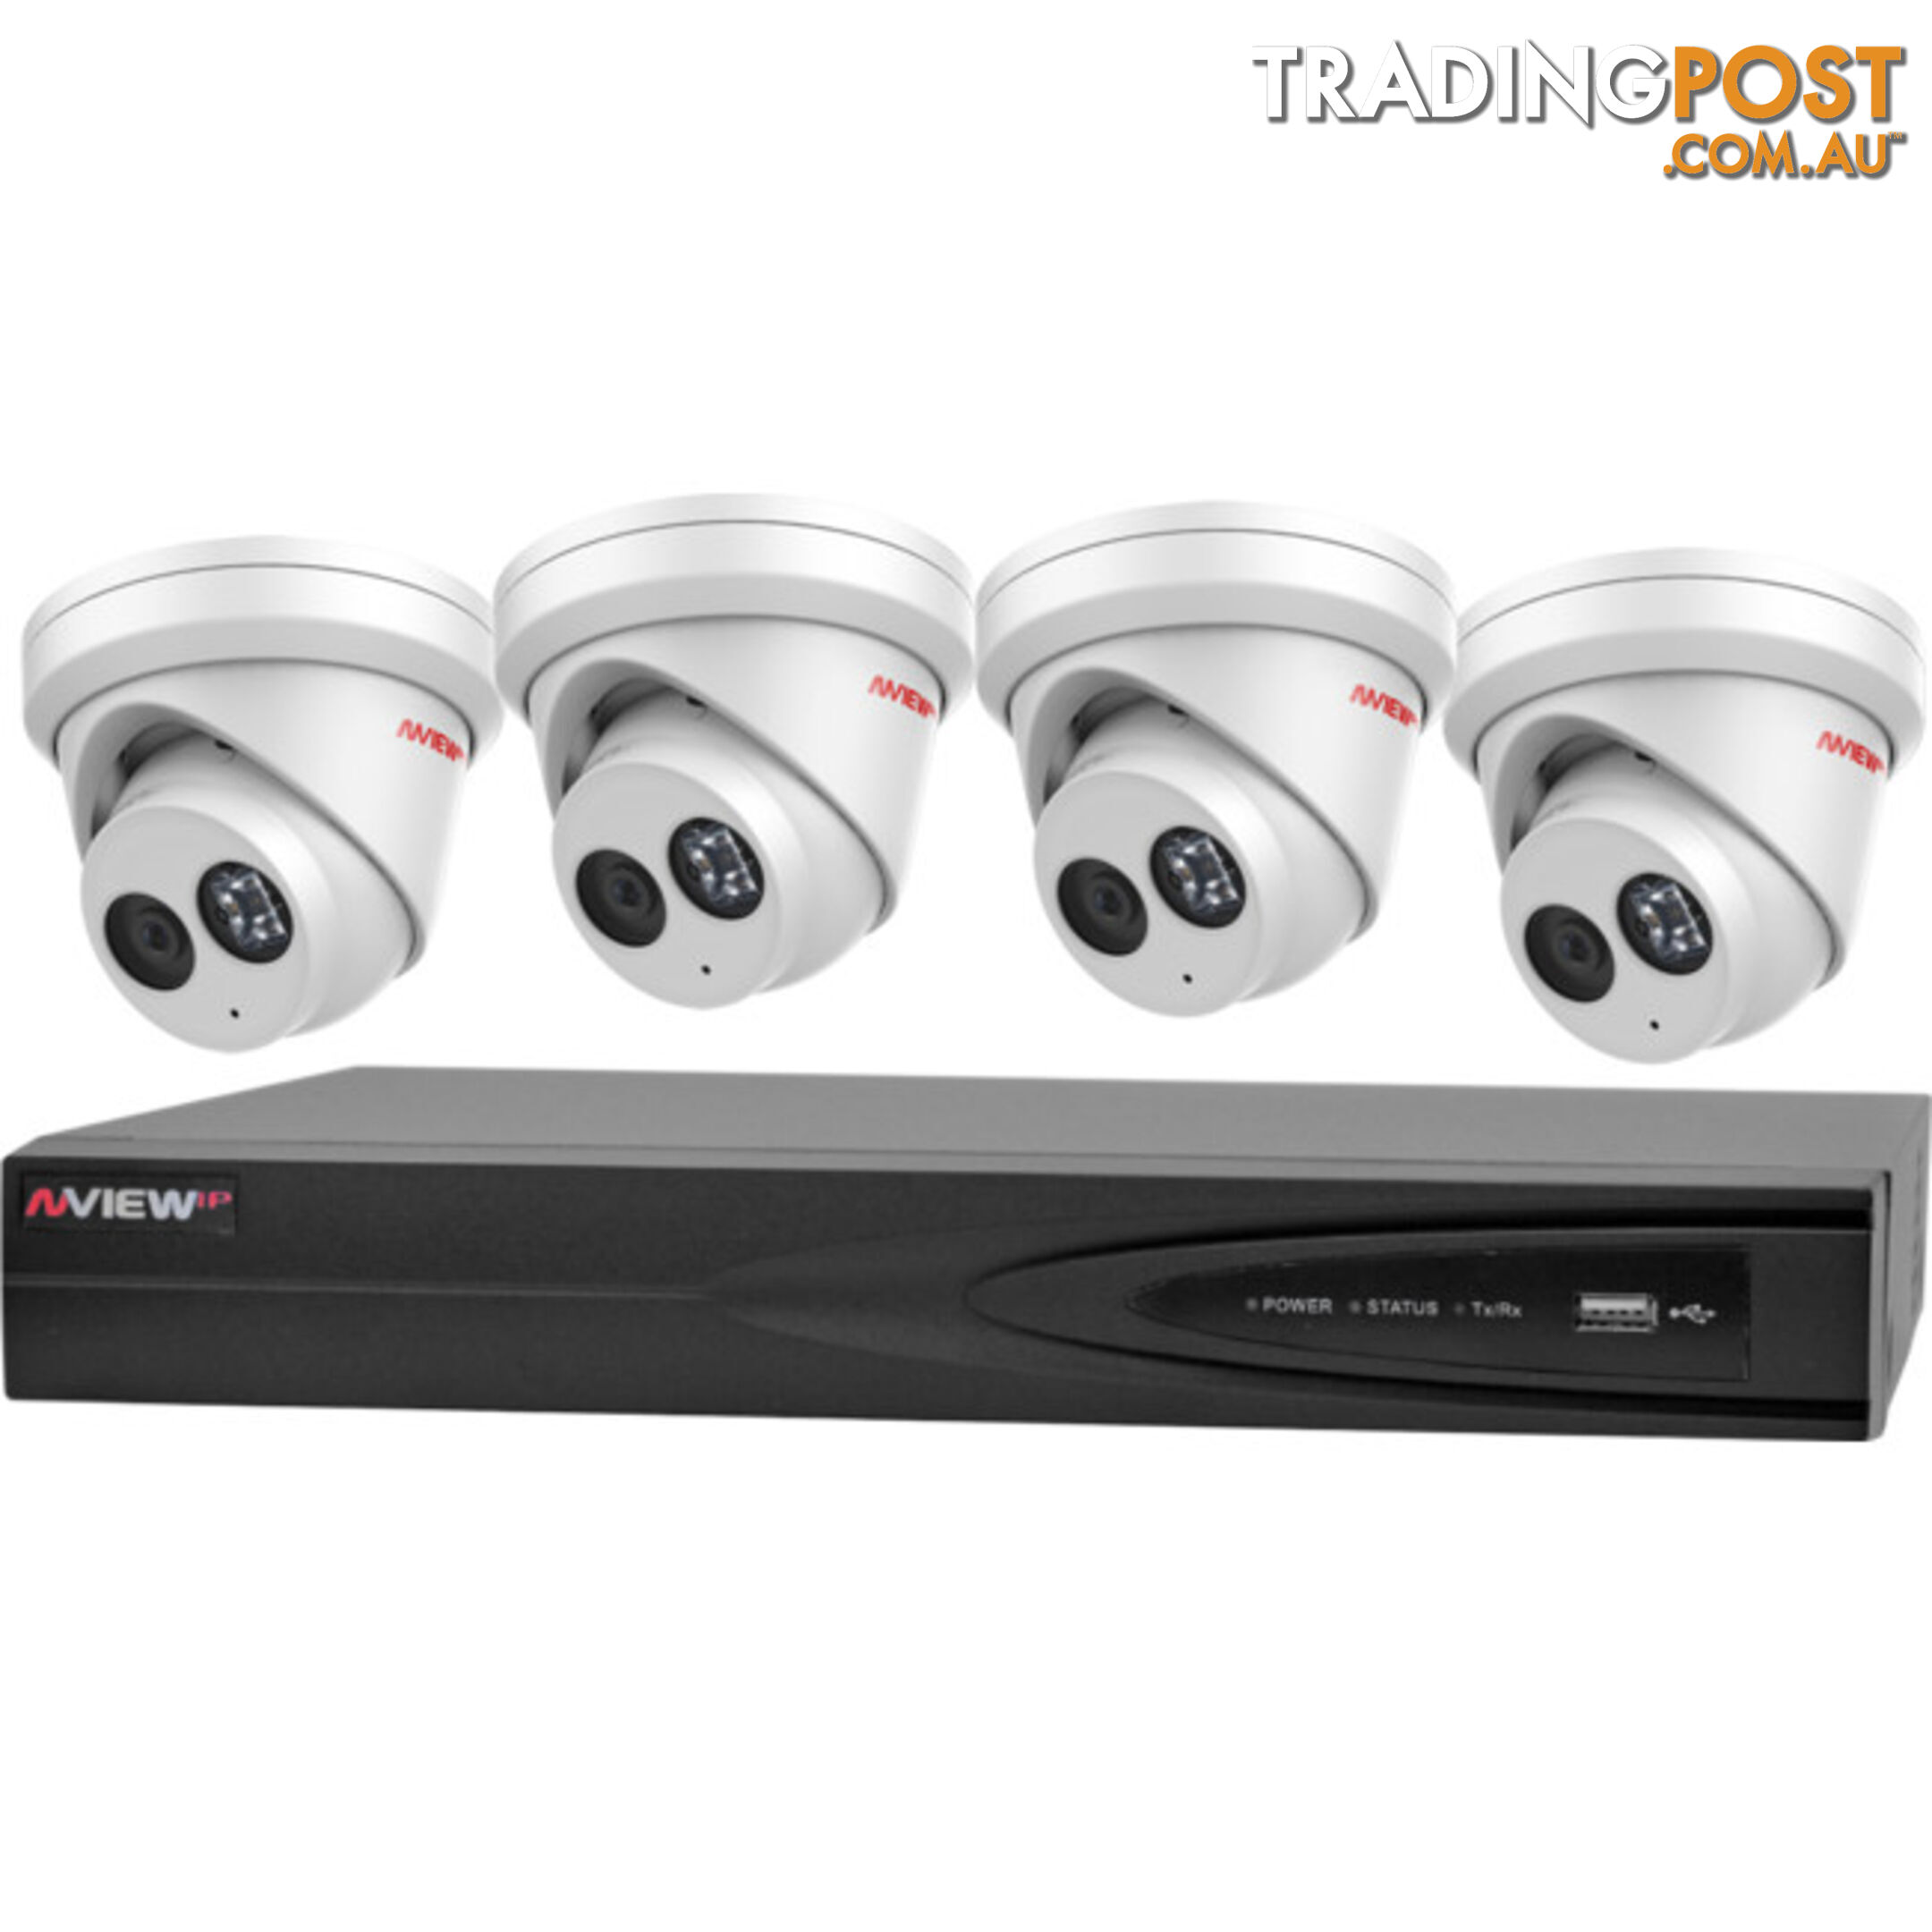 104-202B 6MP IP CCTV KIT NVIEW 8CH NVR & 4 TURRET CAMERAS